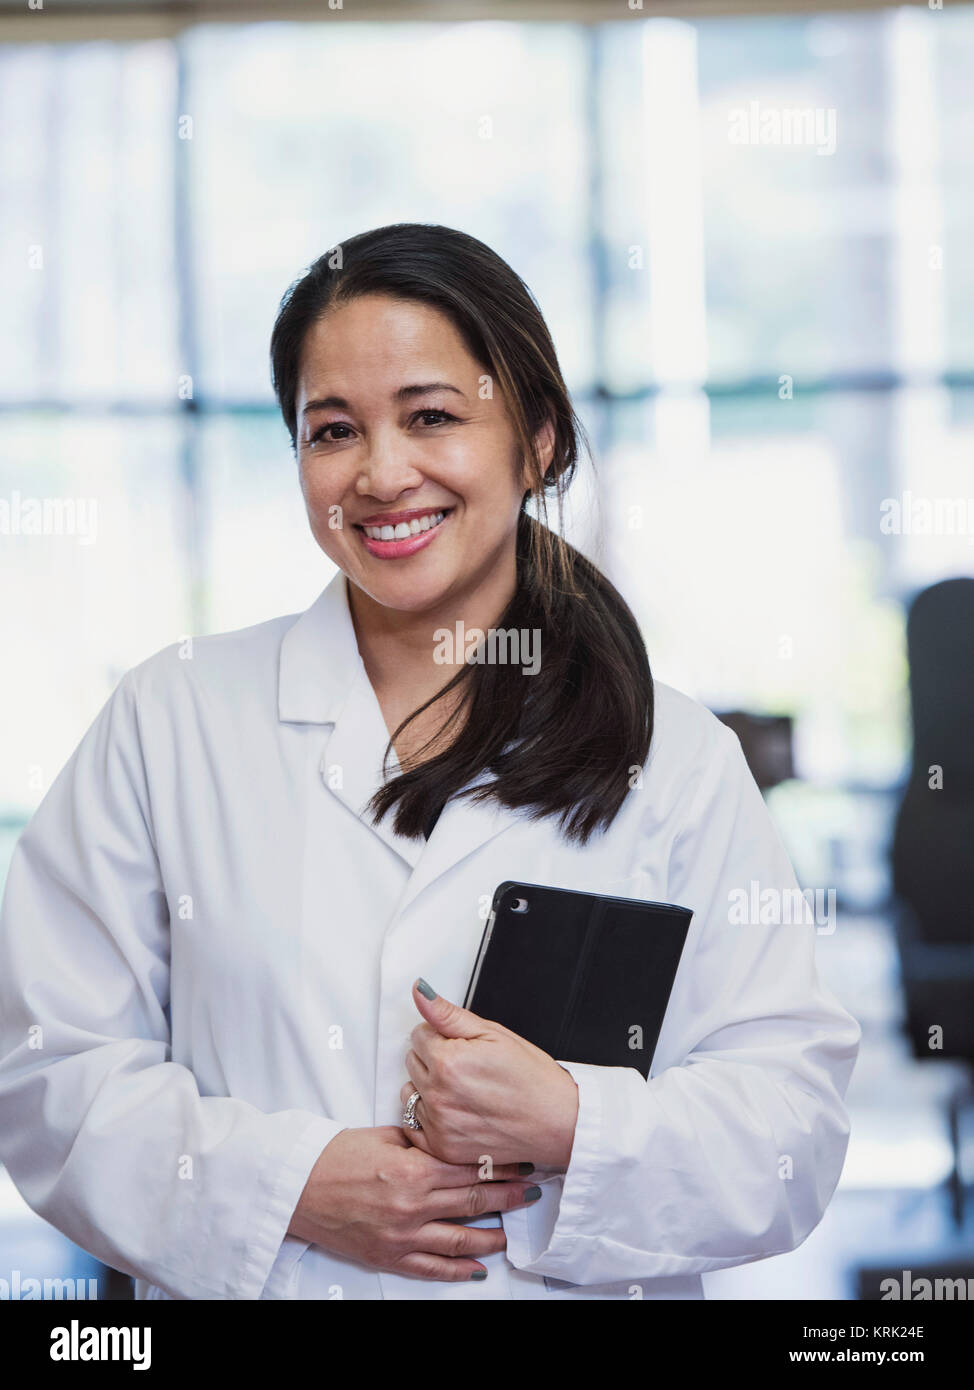 Portrait of smiling Asian physical therapist holding digital tablet Stock Photo